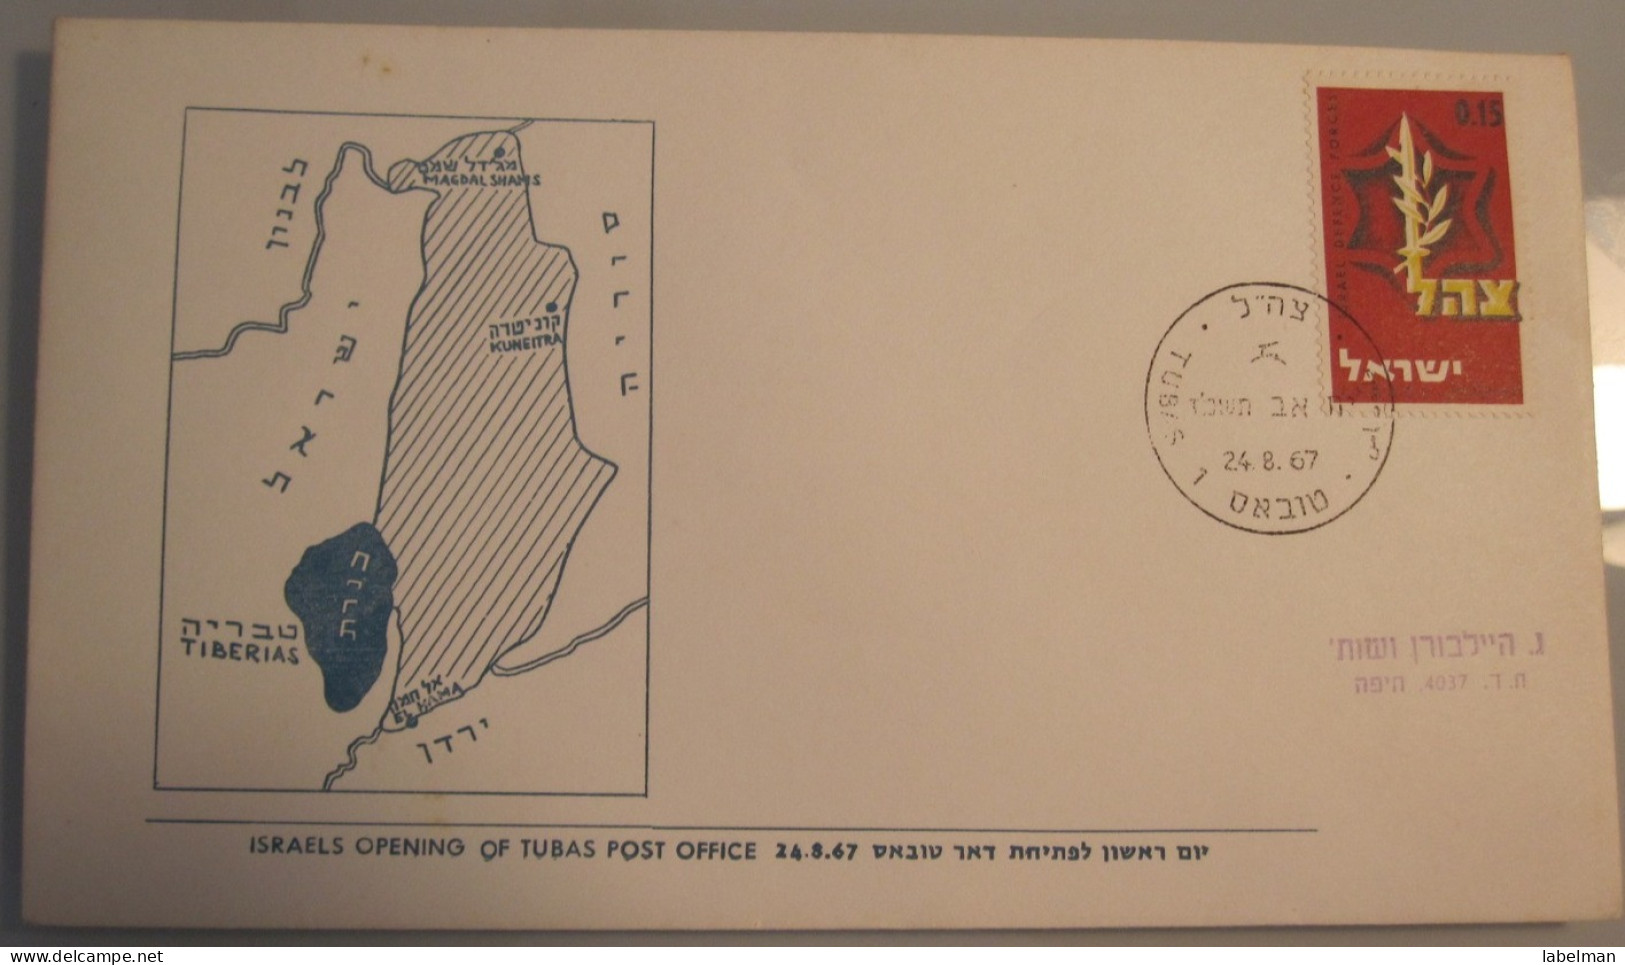 1967 POO FIRST DAY POST OFFICE OPENING MILITARY GOVERNMENT TUBAS JORDAN 6 DAYS WAR COVER ISRAEL CACHET - Covers & Documents